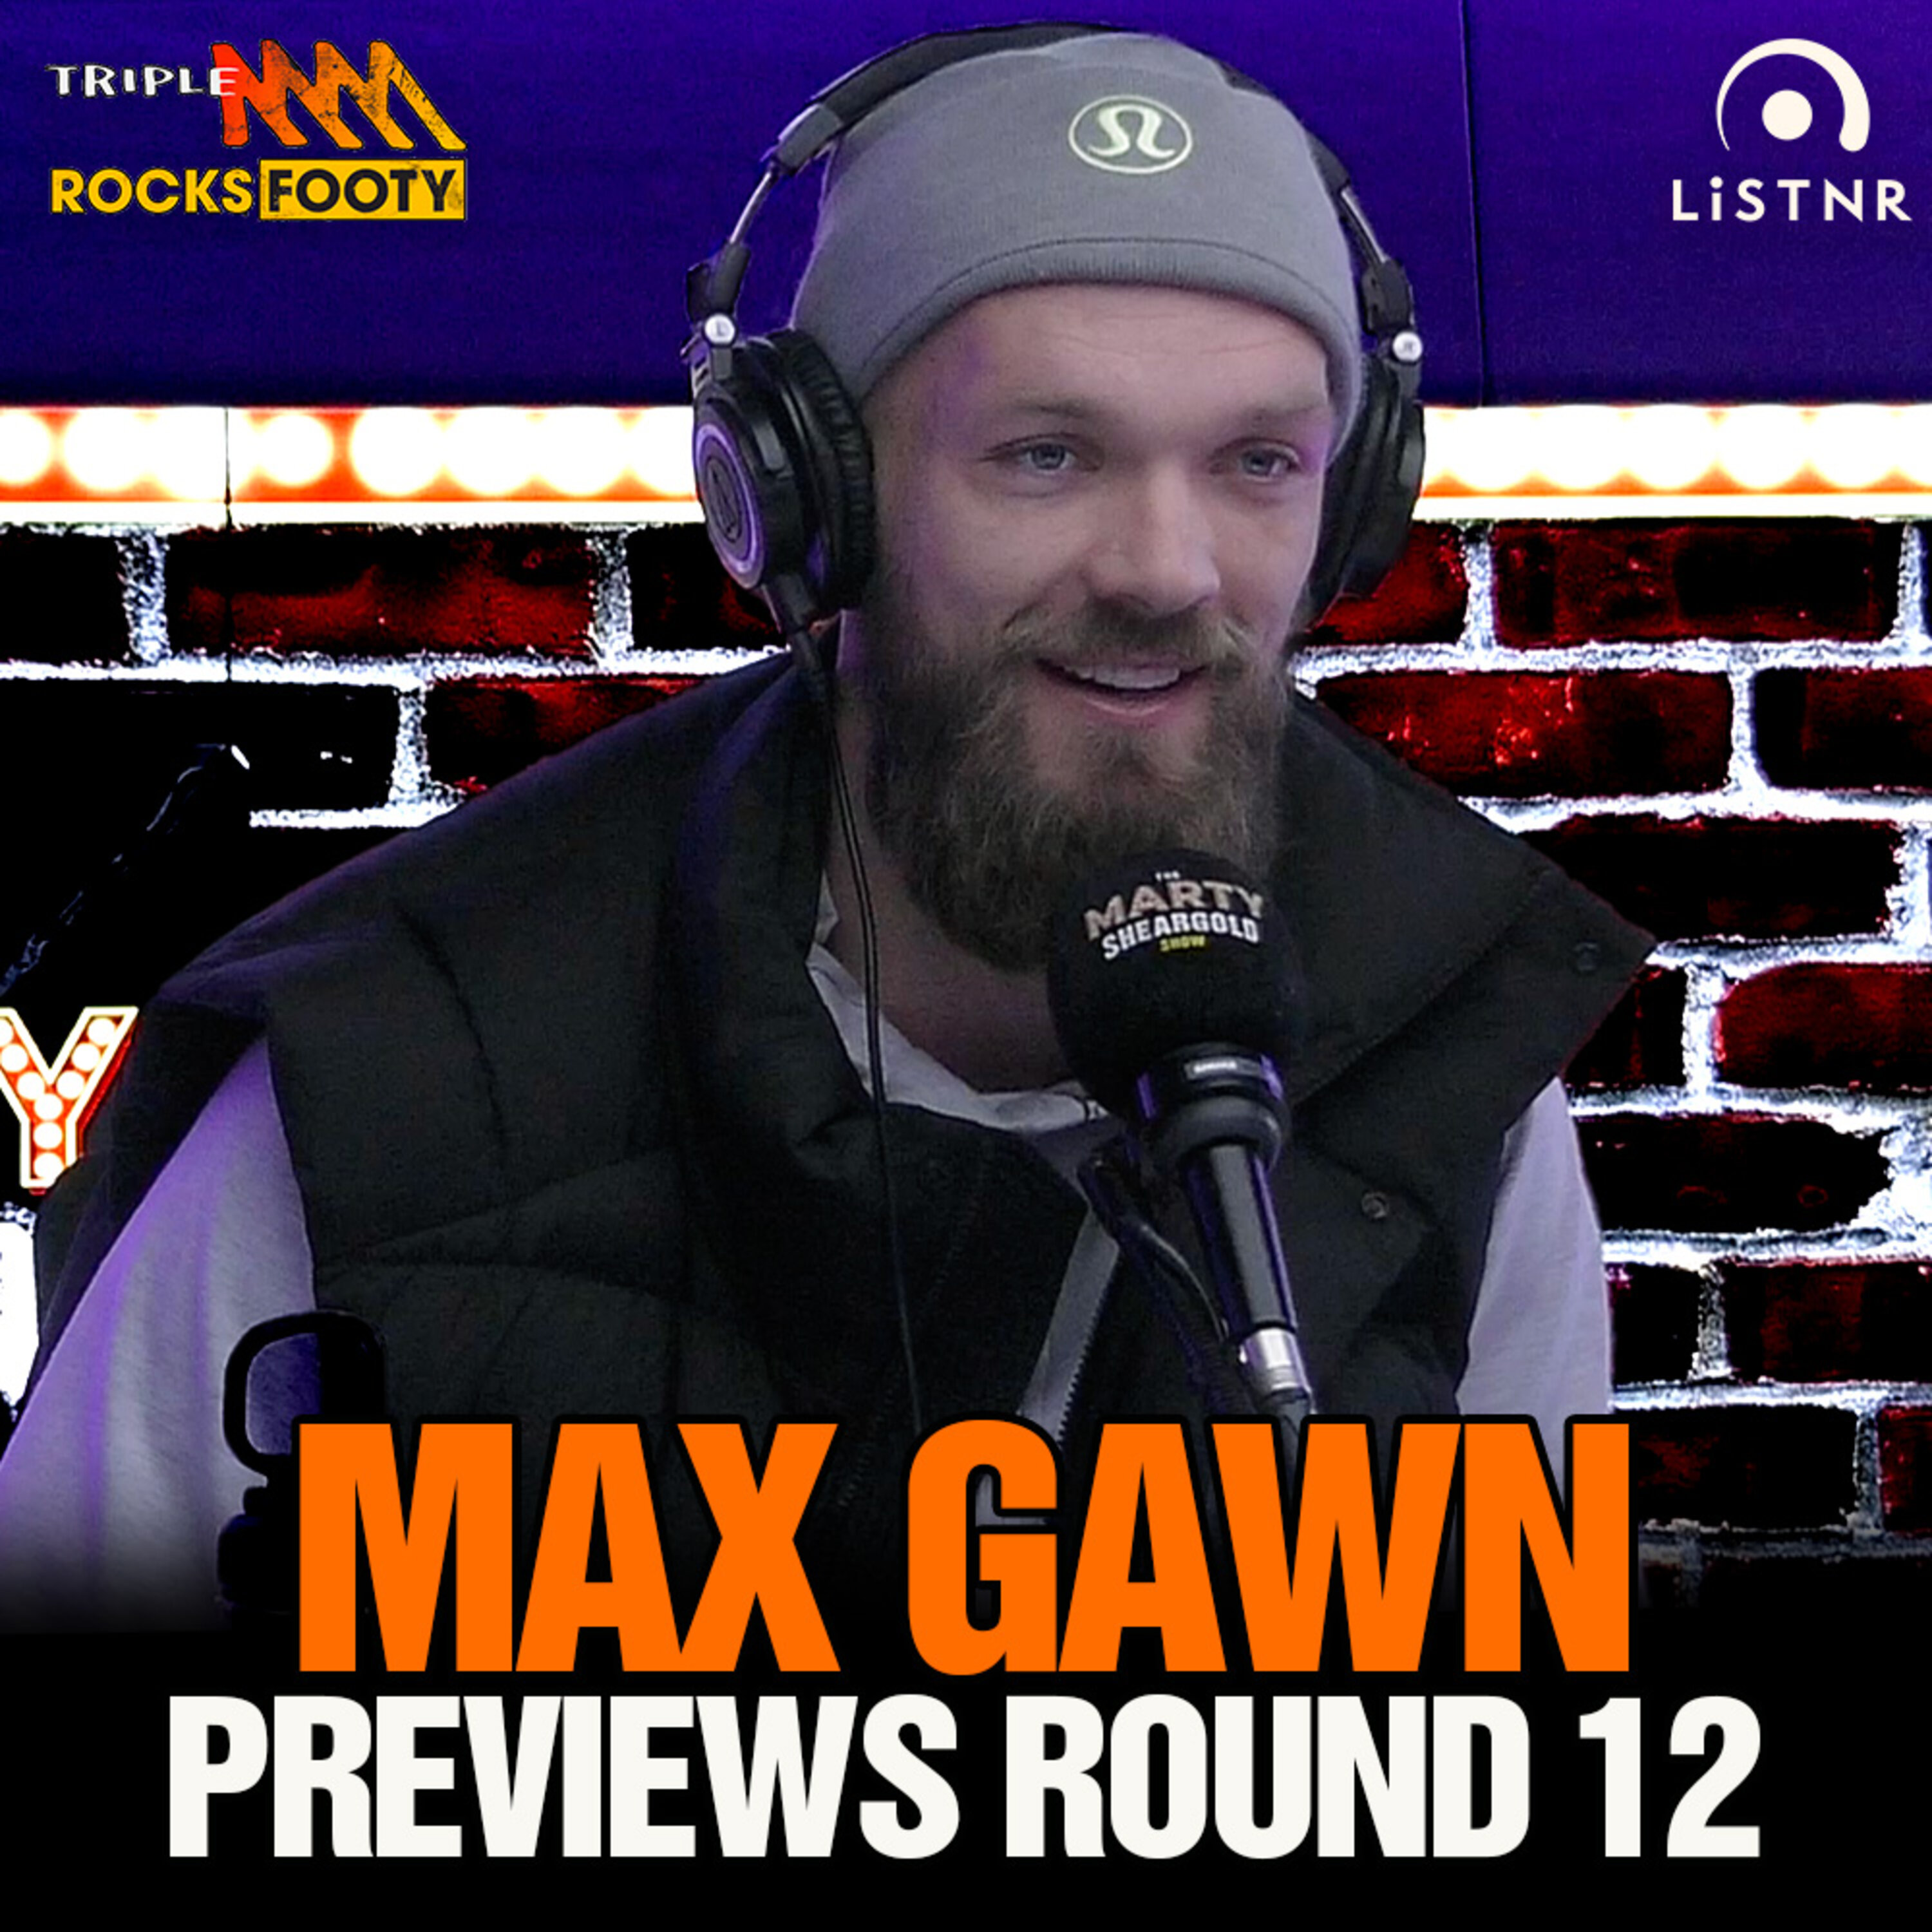 Max Gawn talks media integrity, feedback from fans, mid-season trading, and round 12